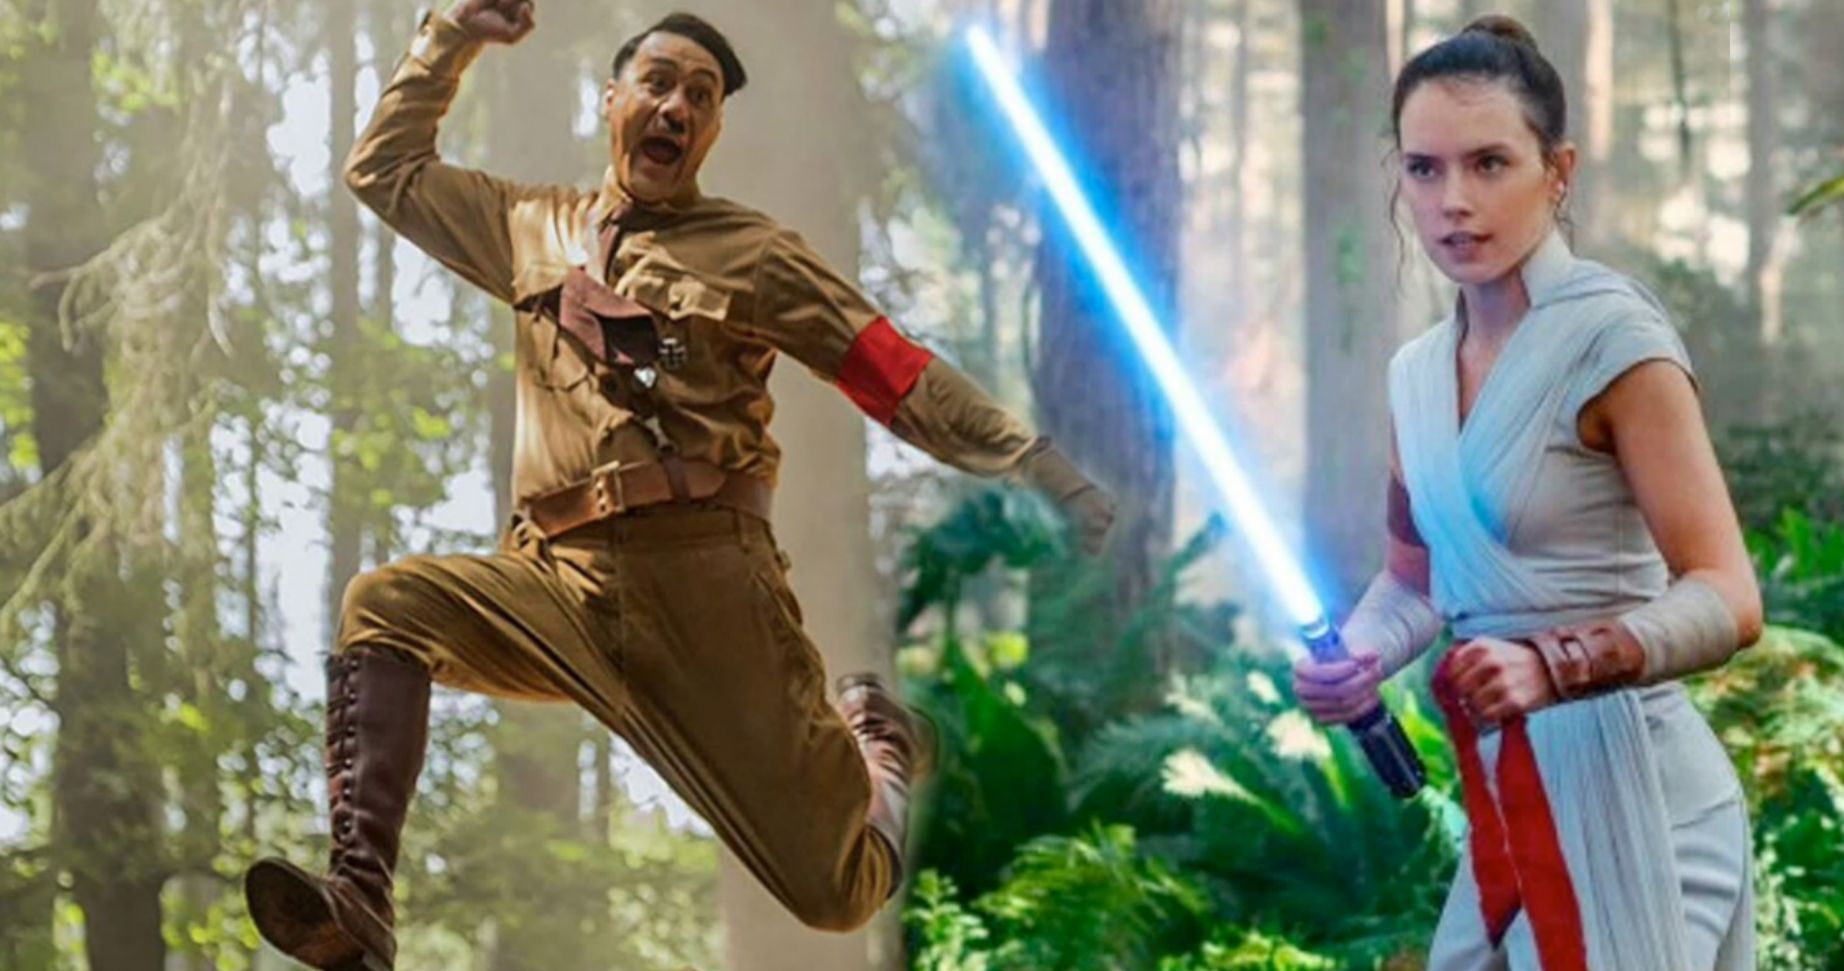 Taika Waititi Would Love to Direct a Star Wars Movie If It's Right and Makes Sense